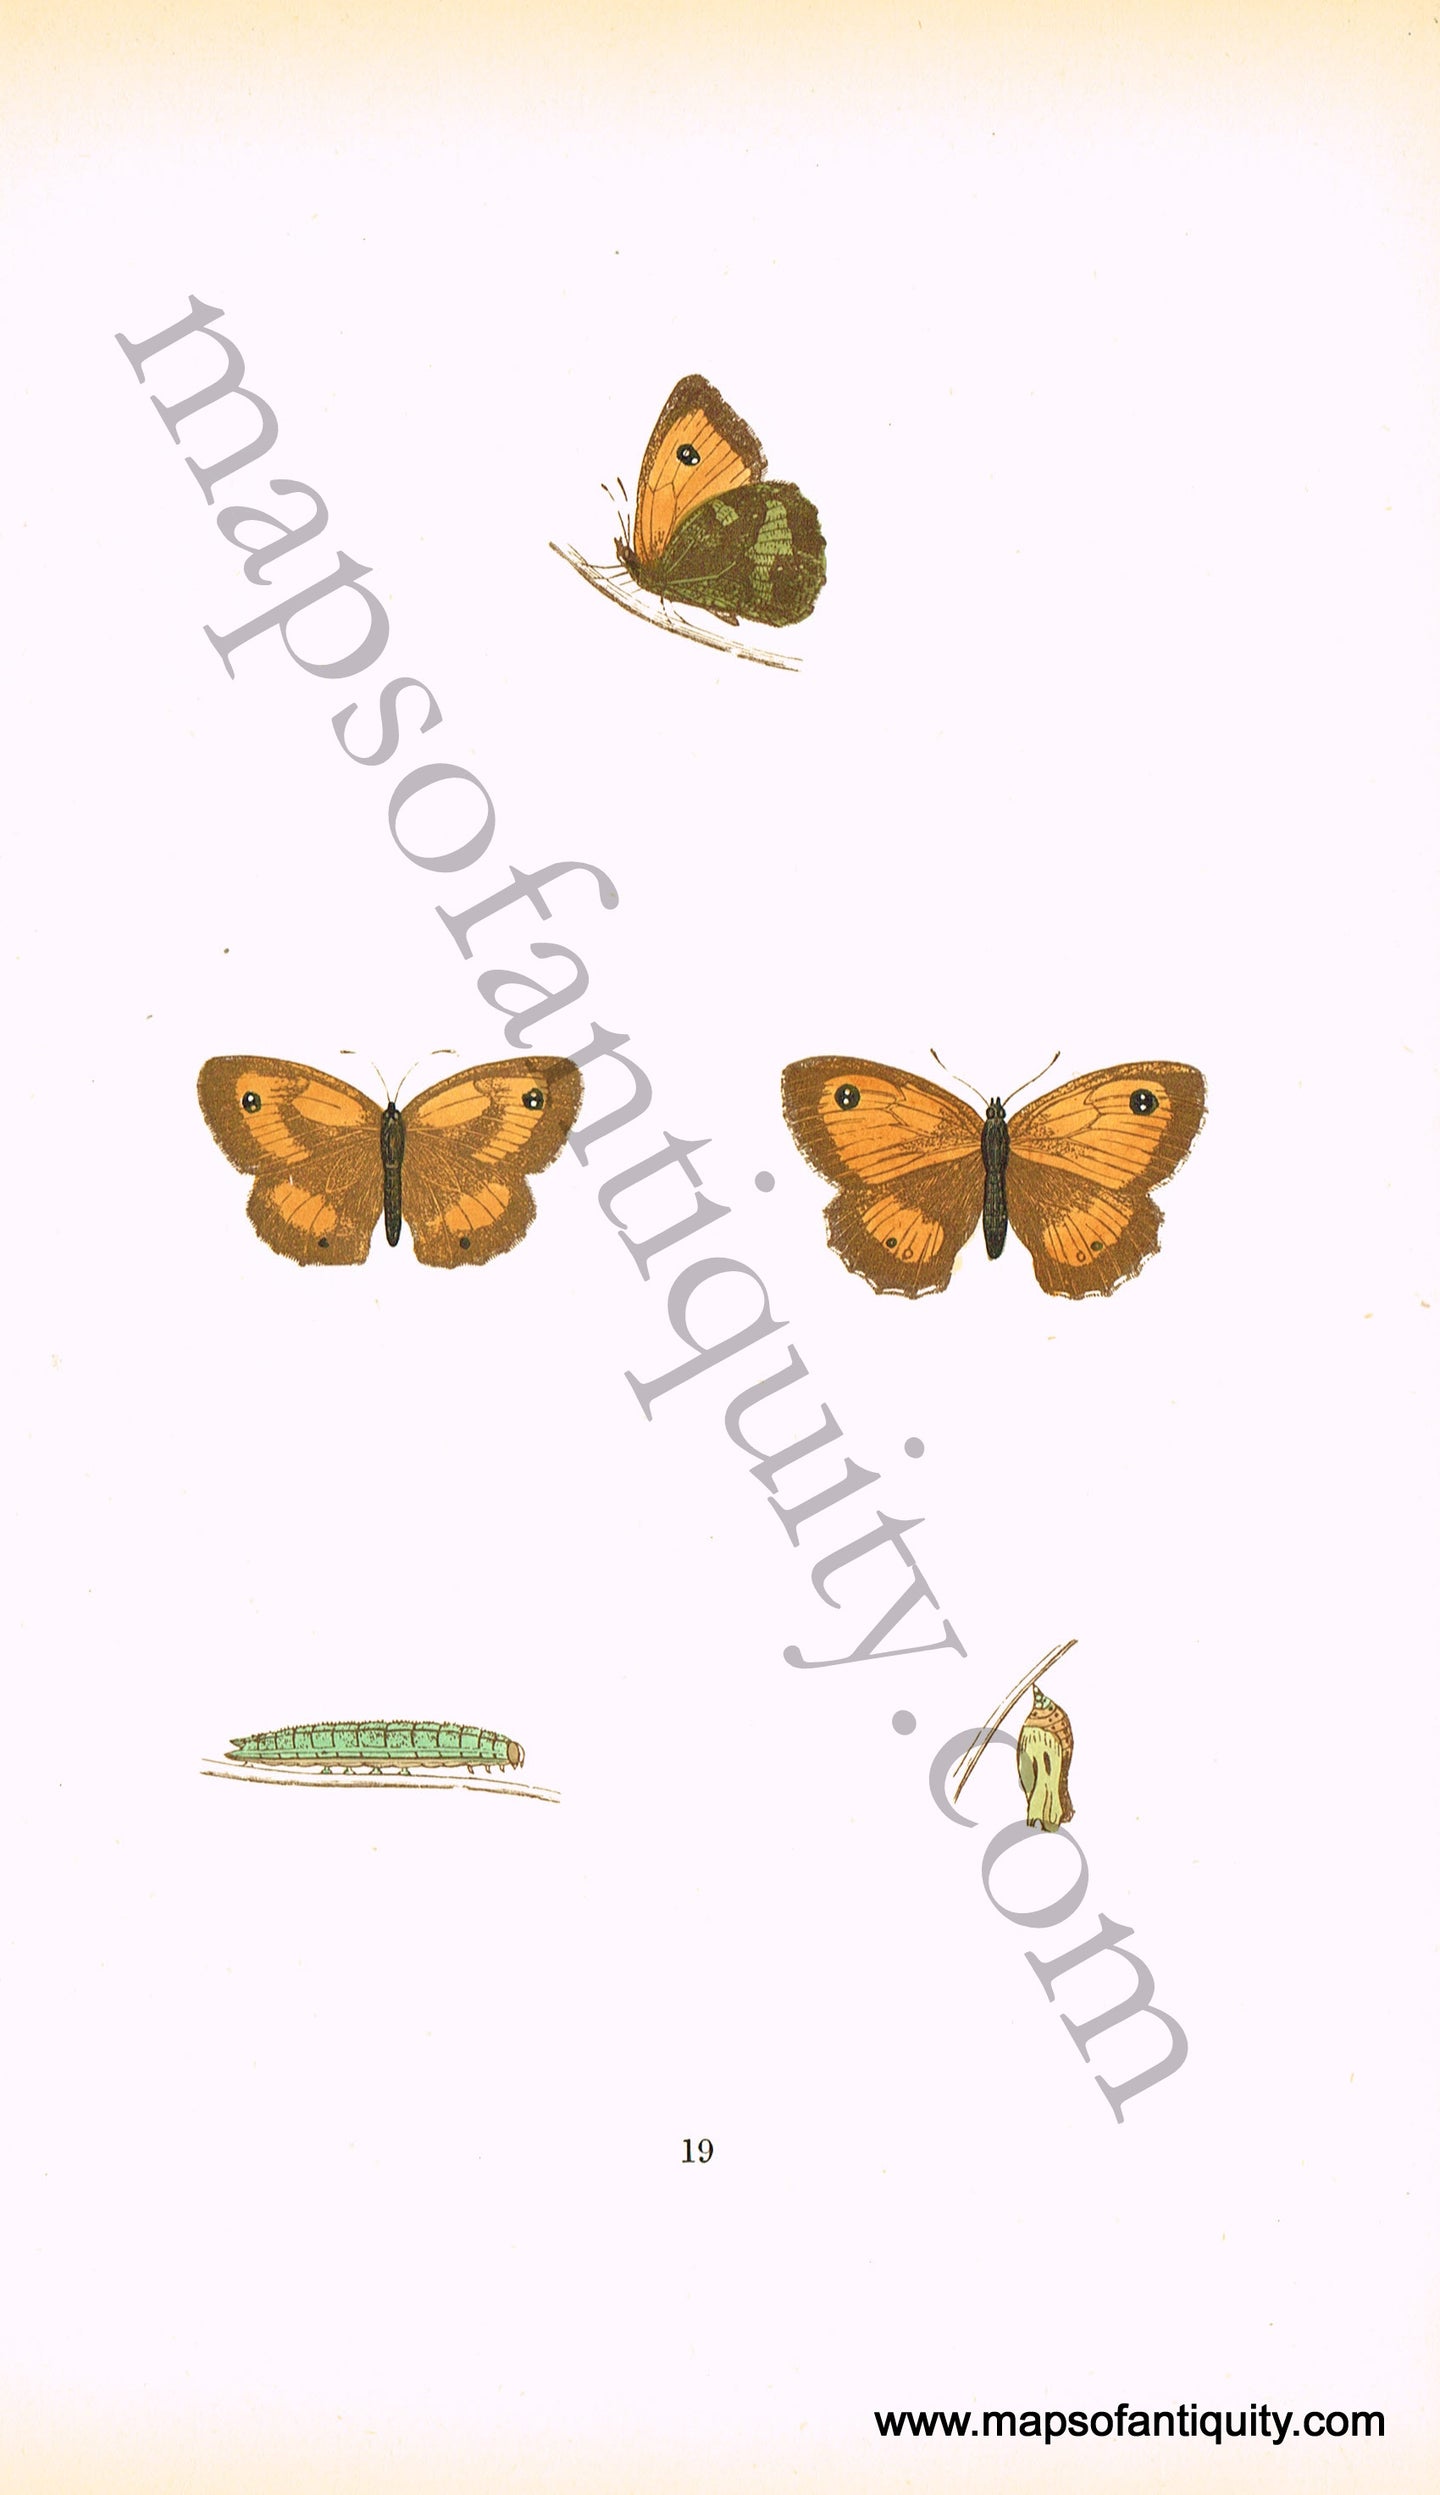 Antique-Hand-Colored-Print-Small-Meadow-Brown-Butterfly-Antique-Prints-Natural-History-Insects-c.-1880-Morris-Maps-Of-Antiquity